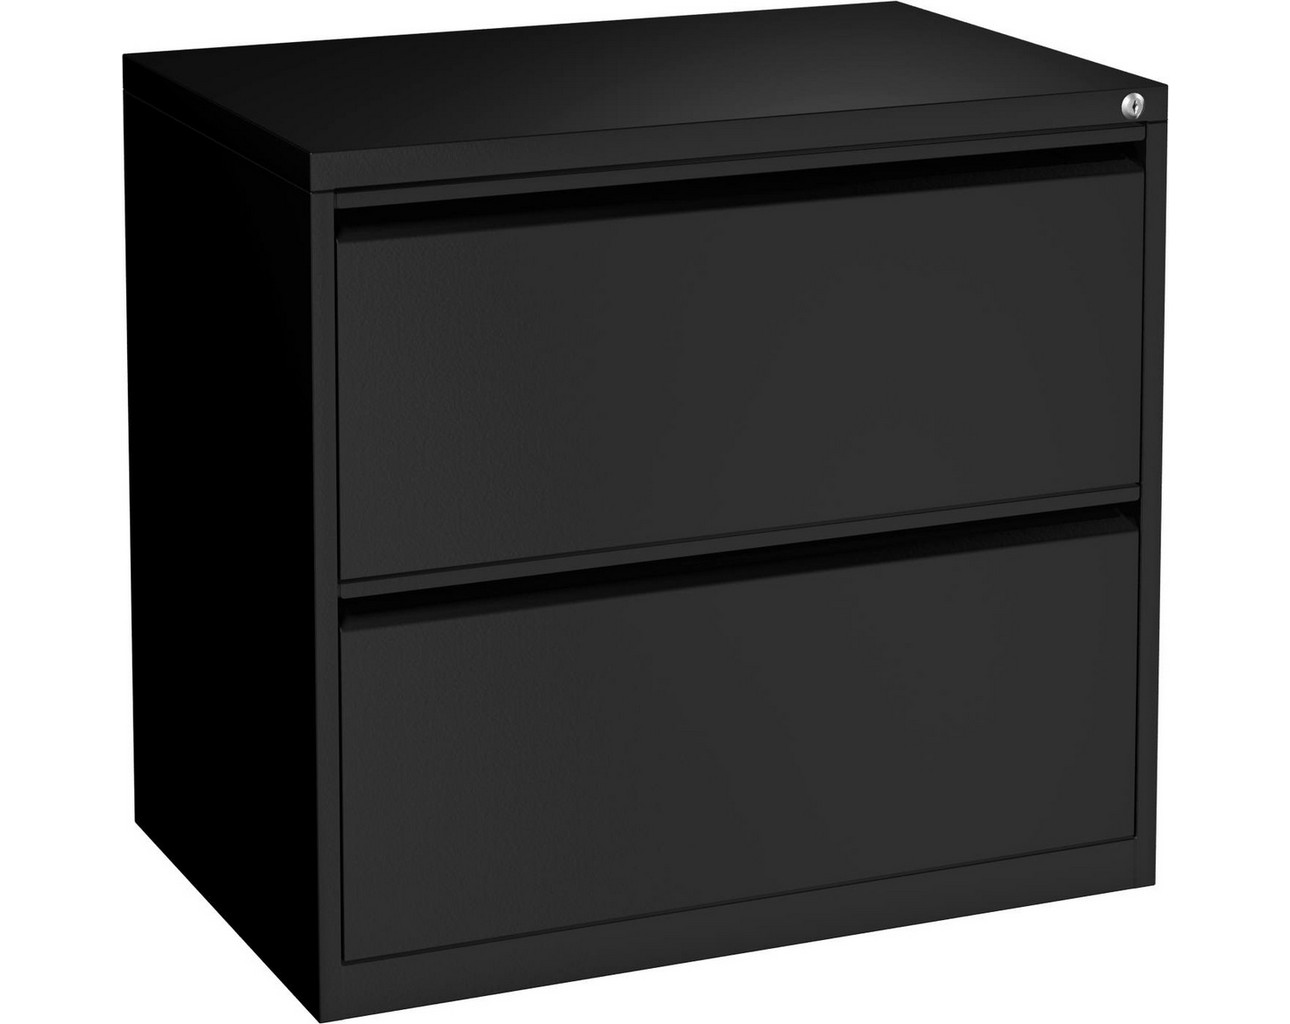 Steelwise Lateral Filing Cabinet – 2 Drawer in Black